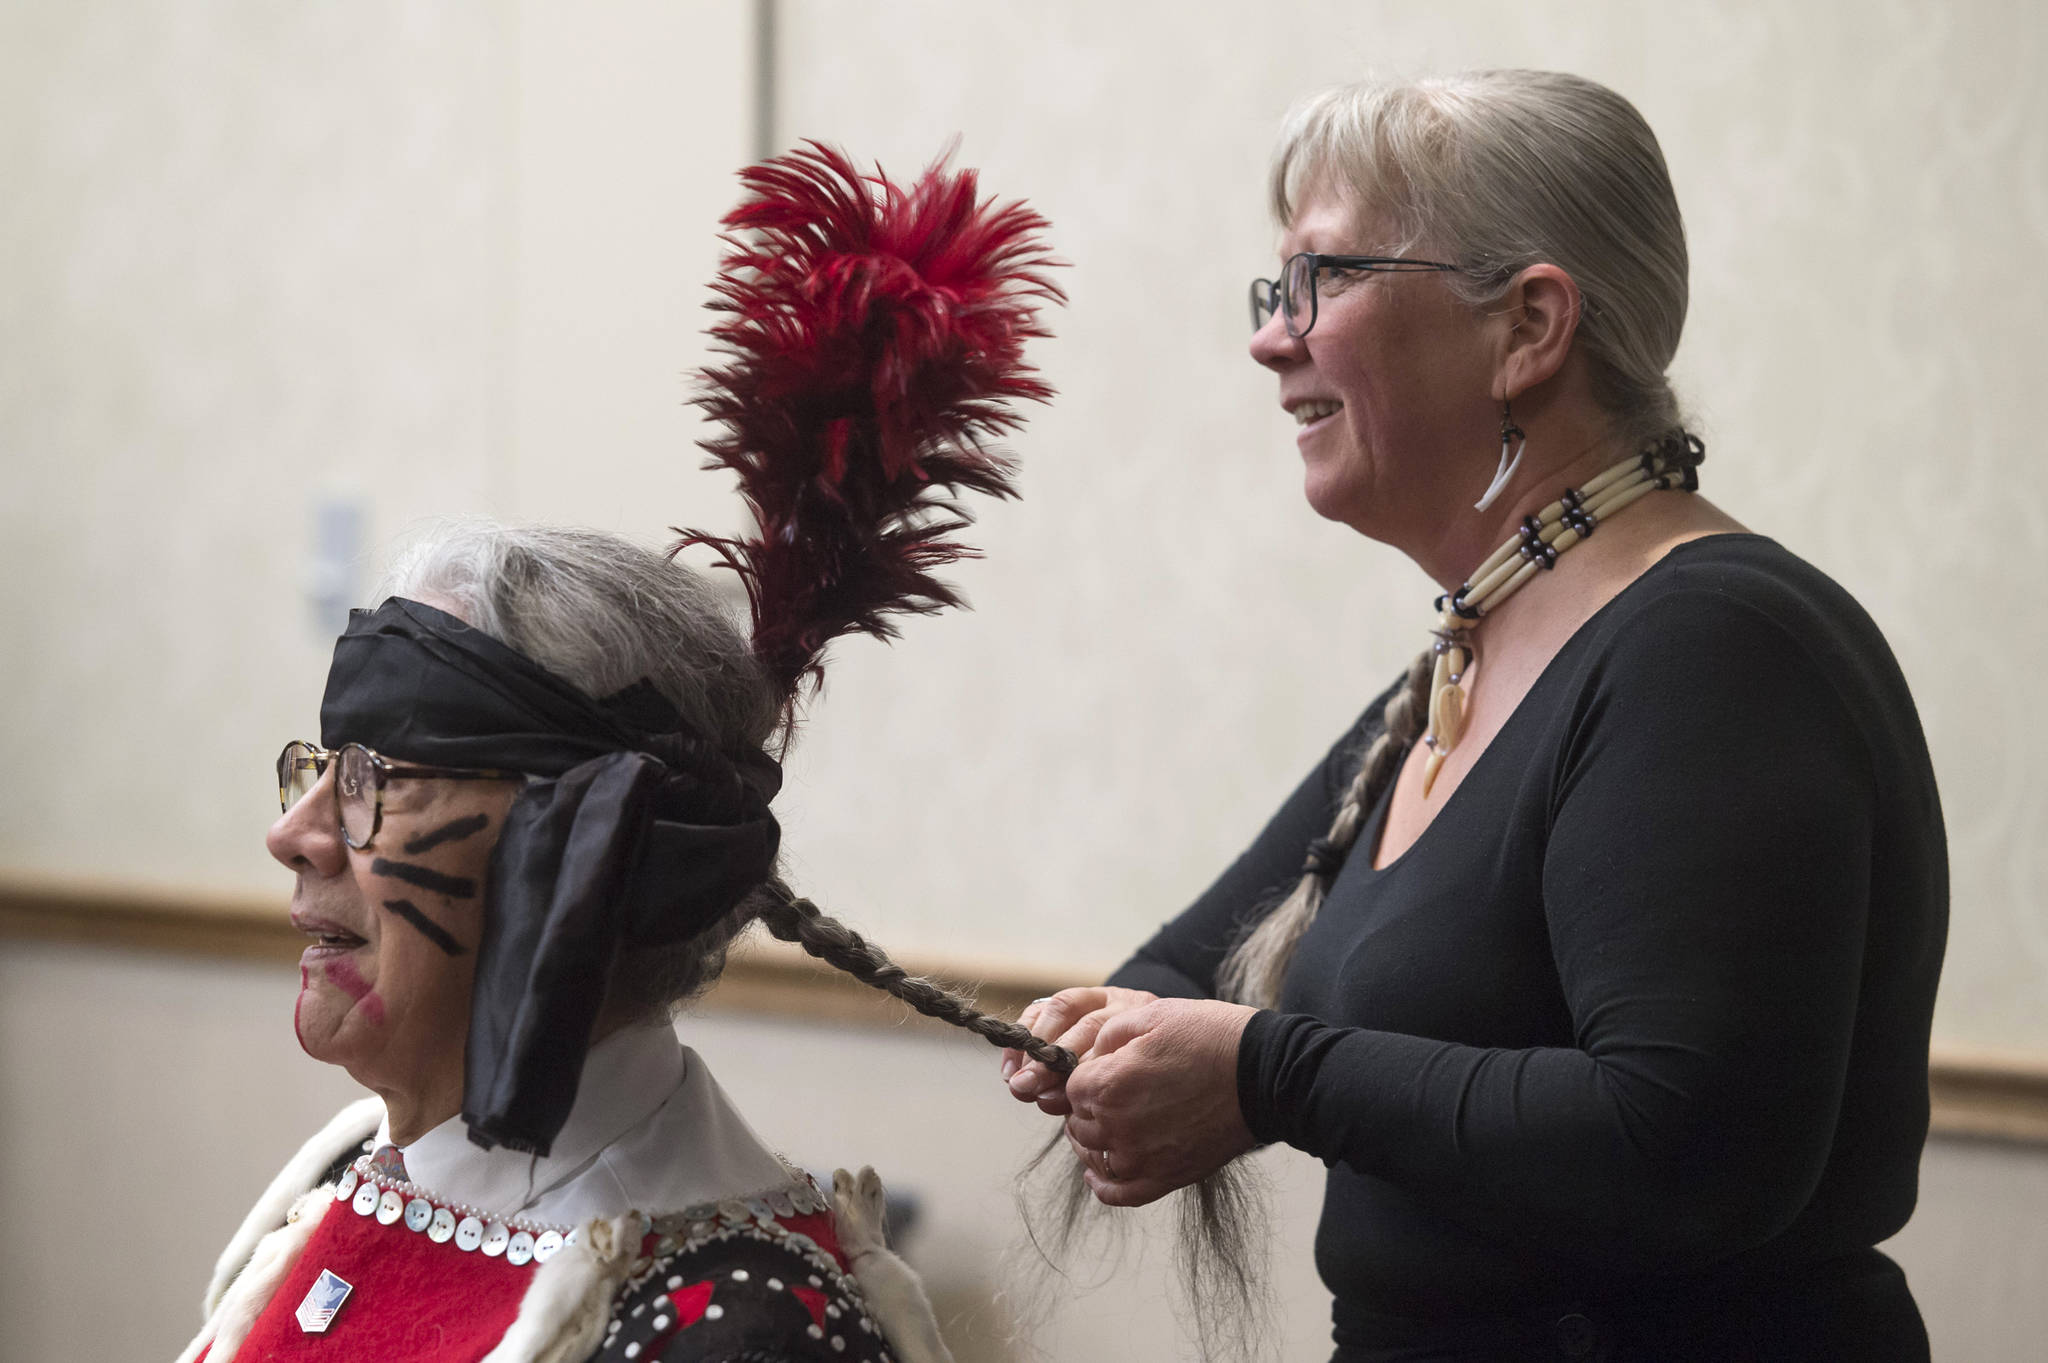 Michelle Rochette braids Walter Soboleff Jr.’s hair before their group, the Yees Ku Oo Dancers, perform during Indigenous Peoples Day celebrations at the Elizabeth Peratrovich Hall on Monday, Oct. 8, 2018. (Michael Penn | Juneau Empire)